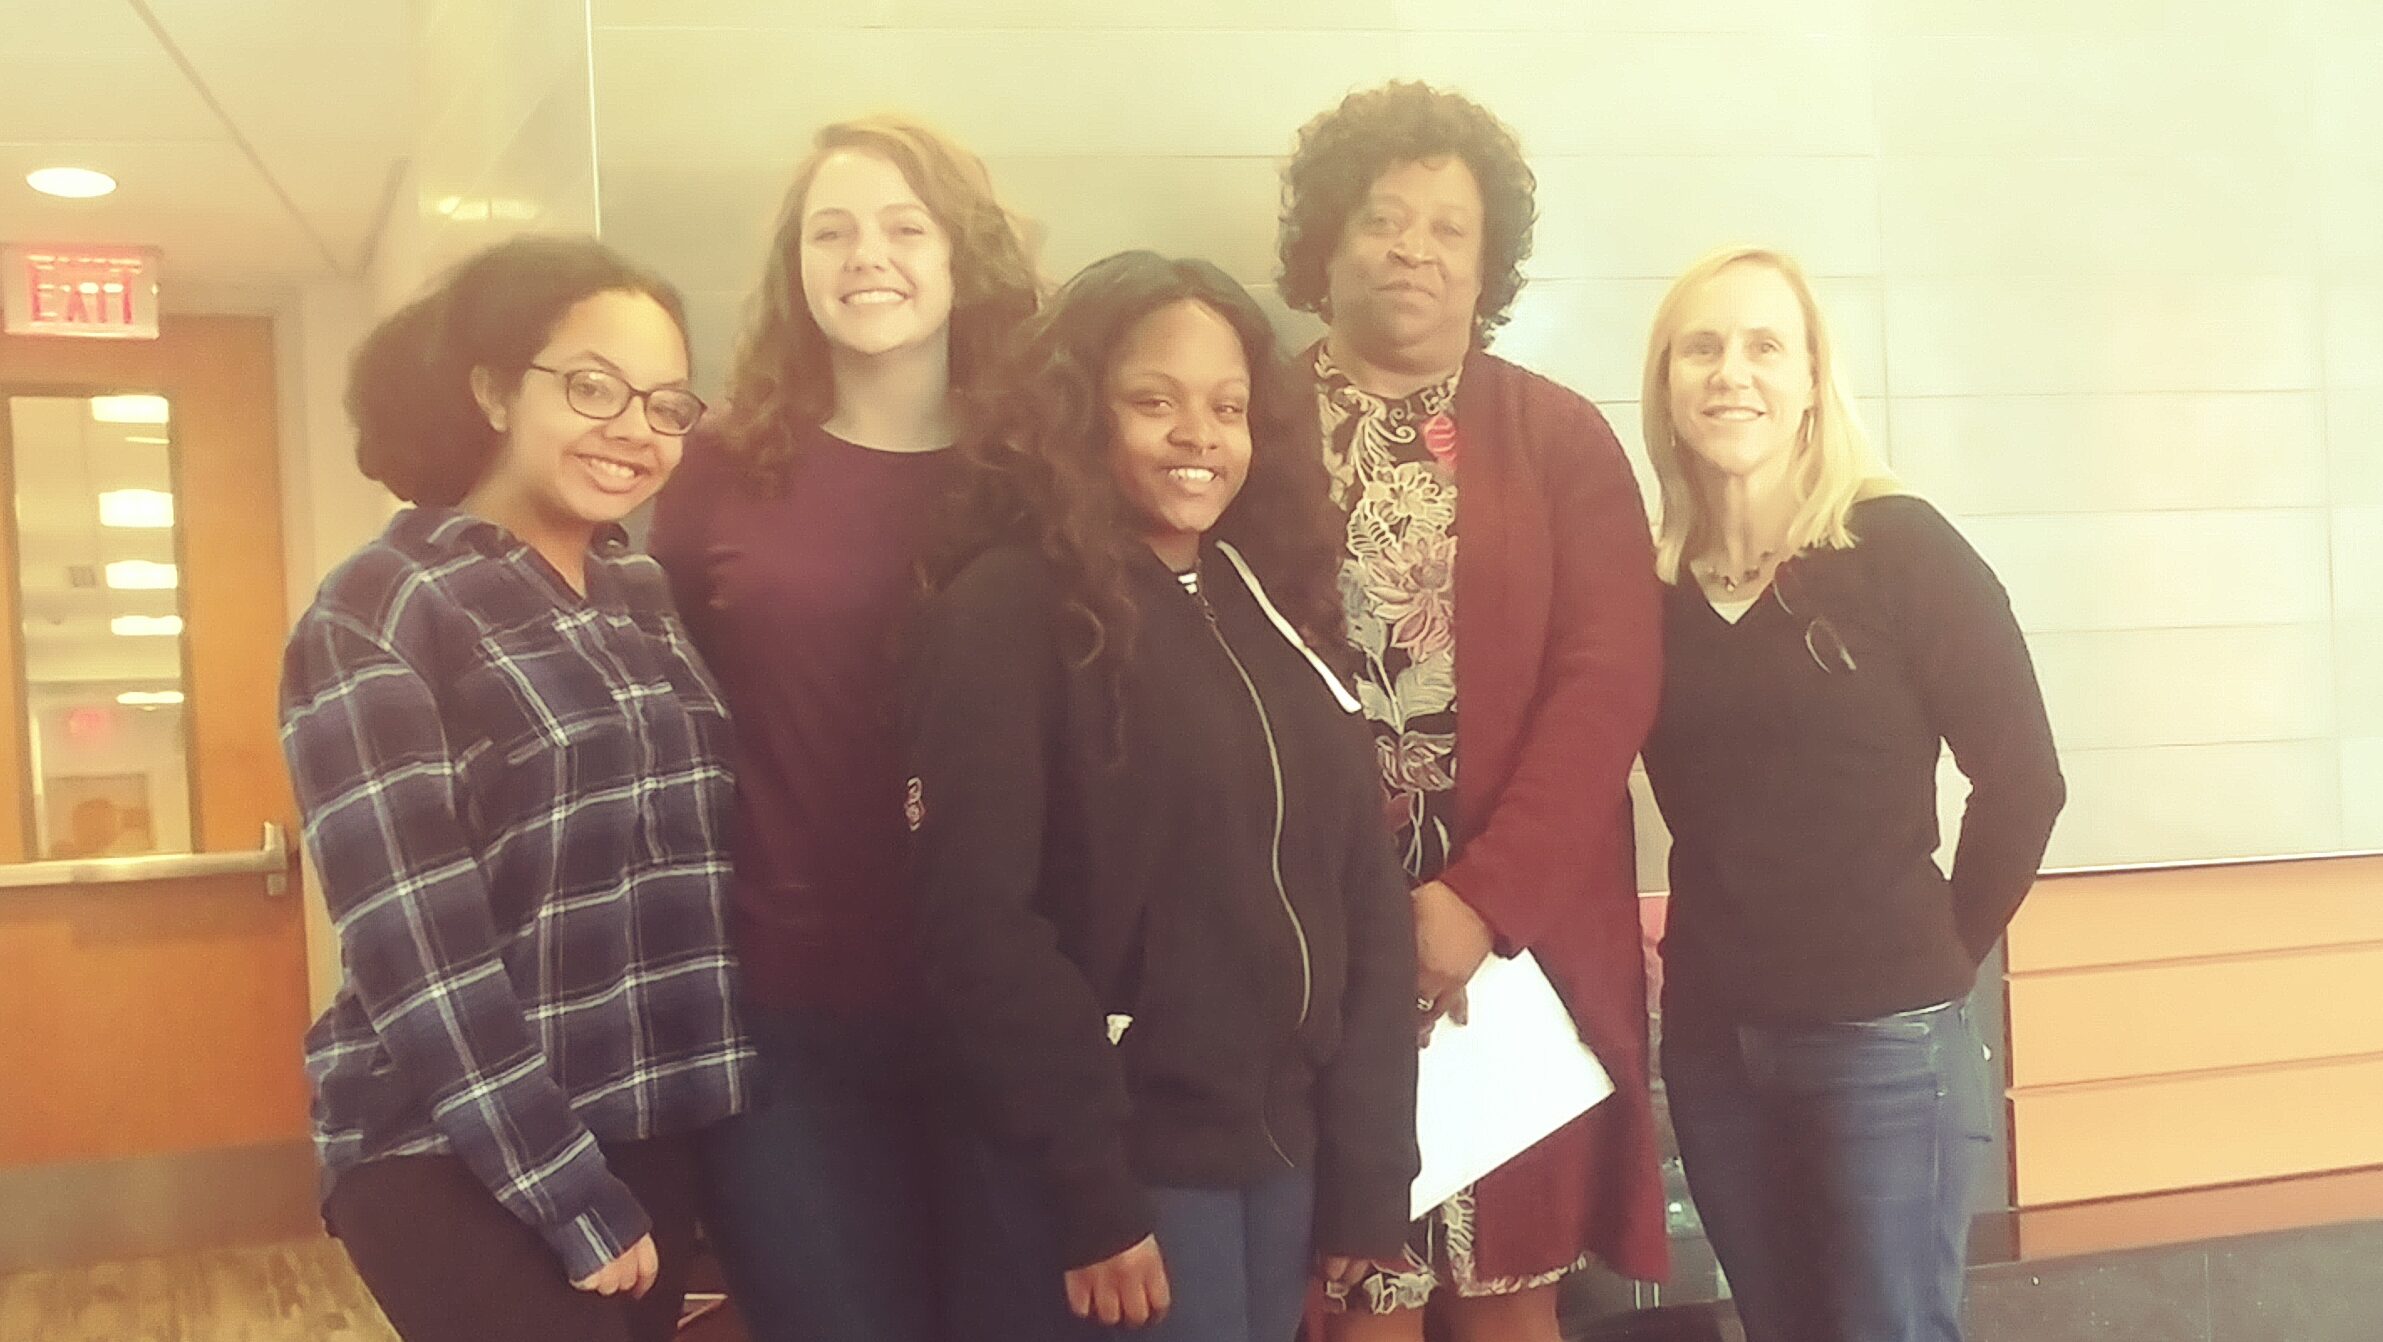 Dr. McLean serves as a mentor for the Chancellor’s Leadership Development Program. Pictured is her mentee group (l-r) Manika Hemmerich, Kalynne Turner, Jai’Lynne Wilburn, Dr. McLean, Dr. Heather Patisaul (the other group mentor).